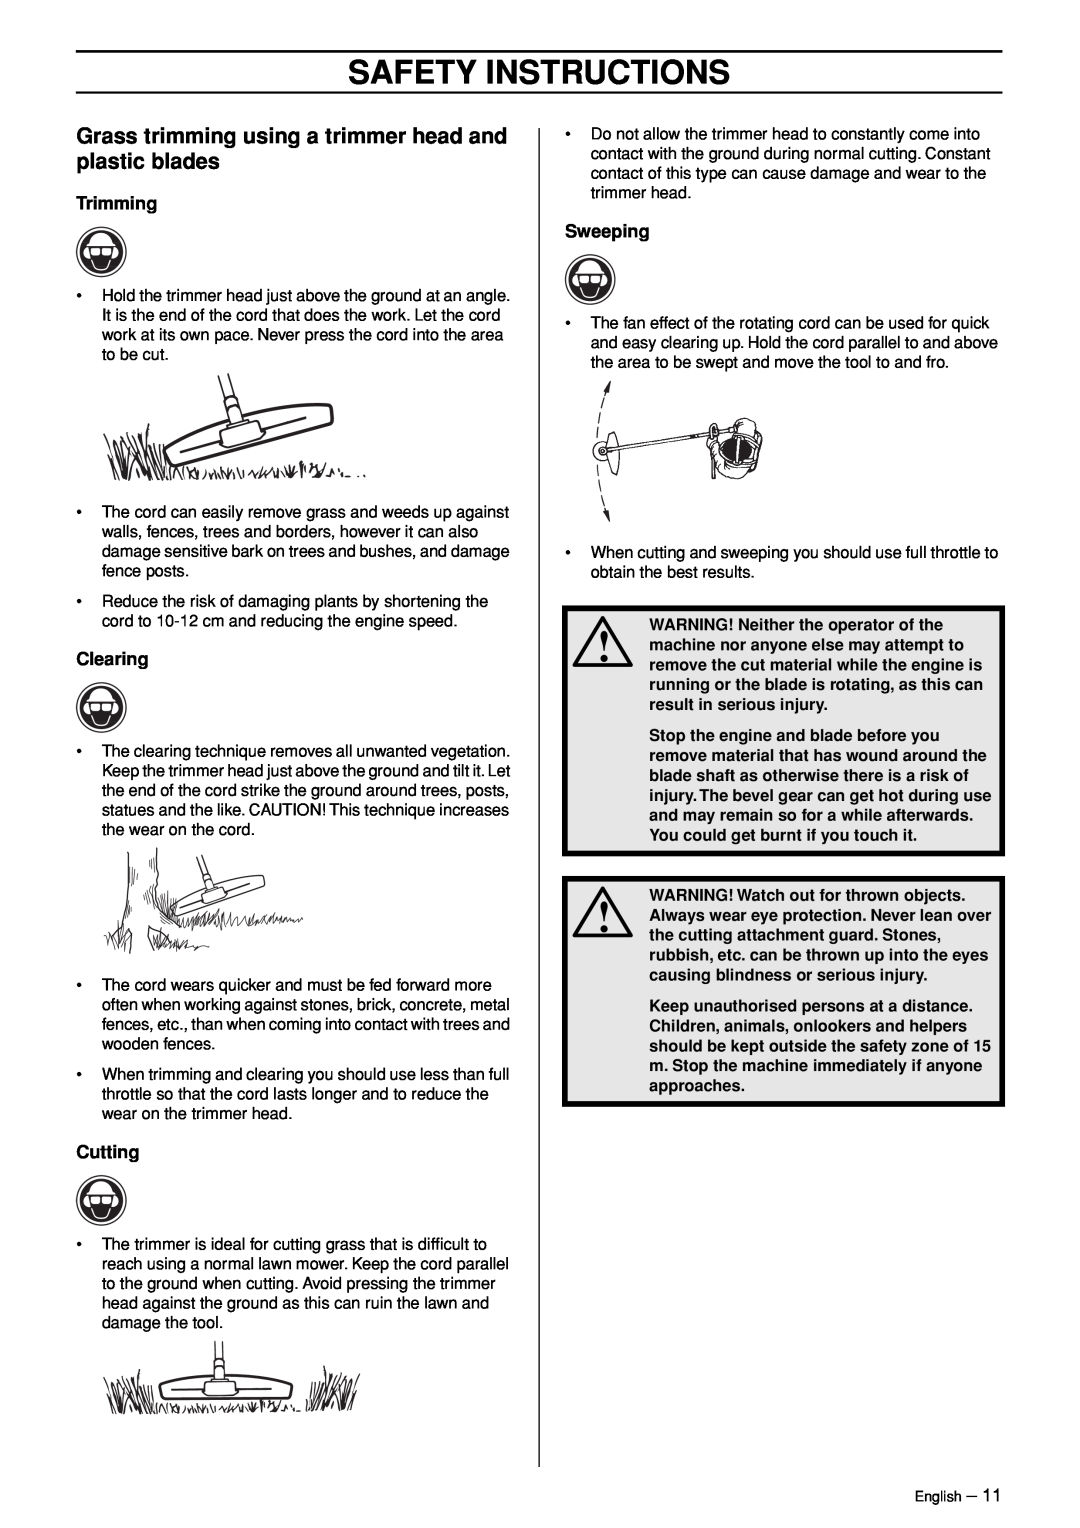 Husqvarna 326RJX-Series manual Safety Instructions, Trimming, Clearing, Cutting, Sweeping 